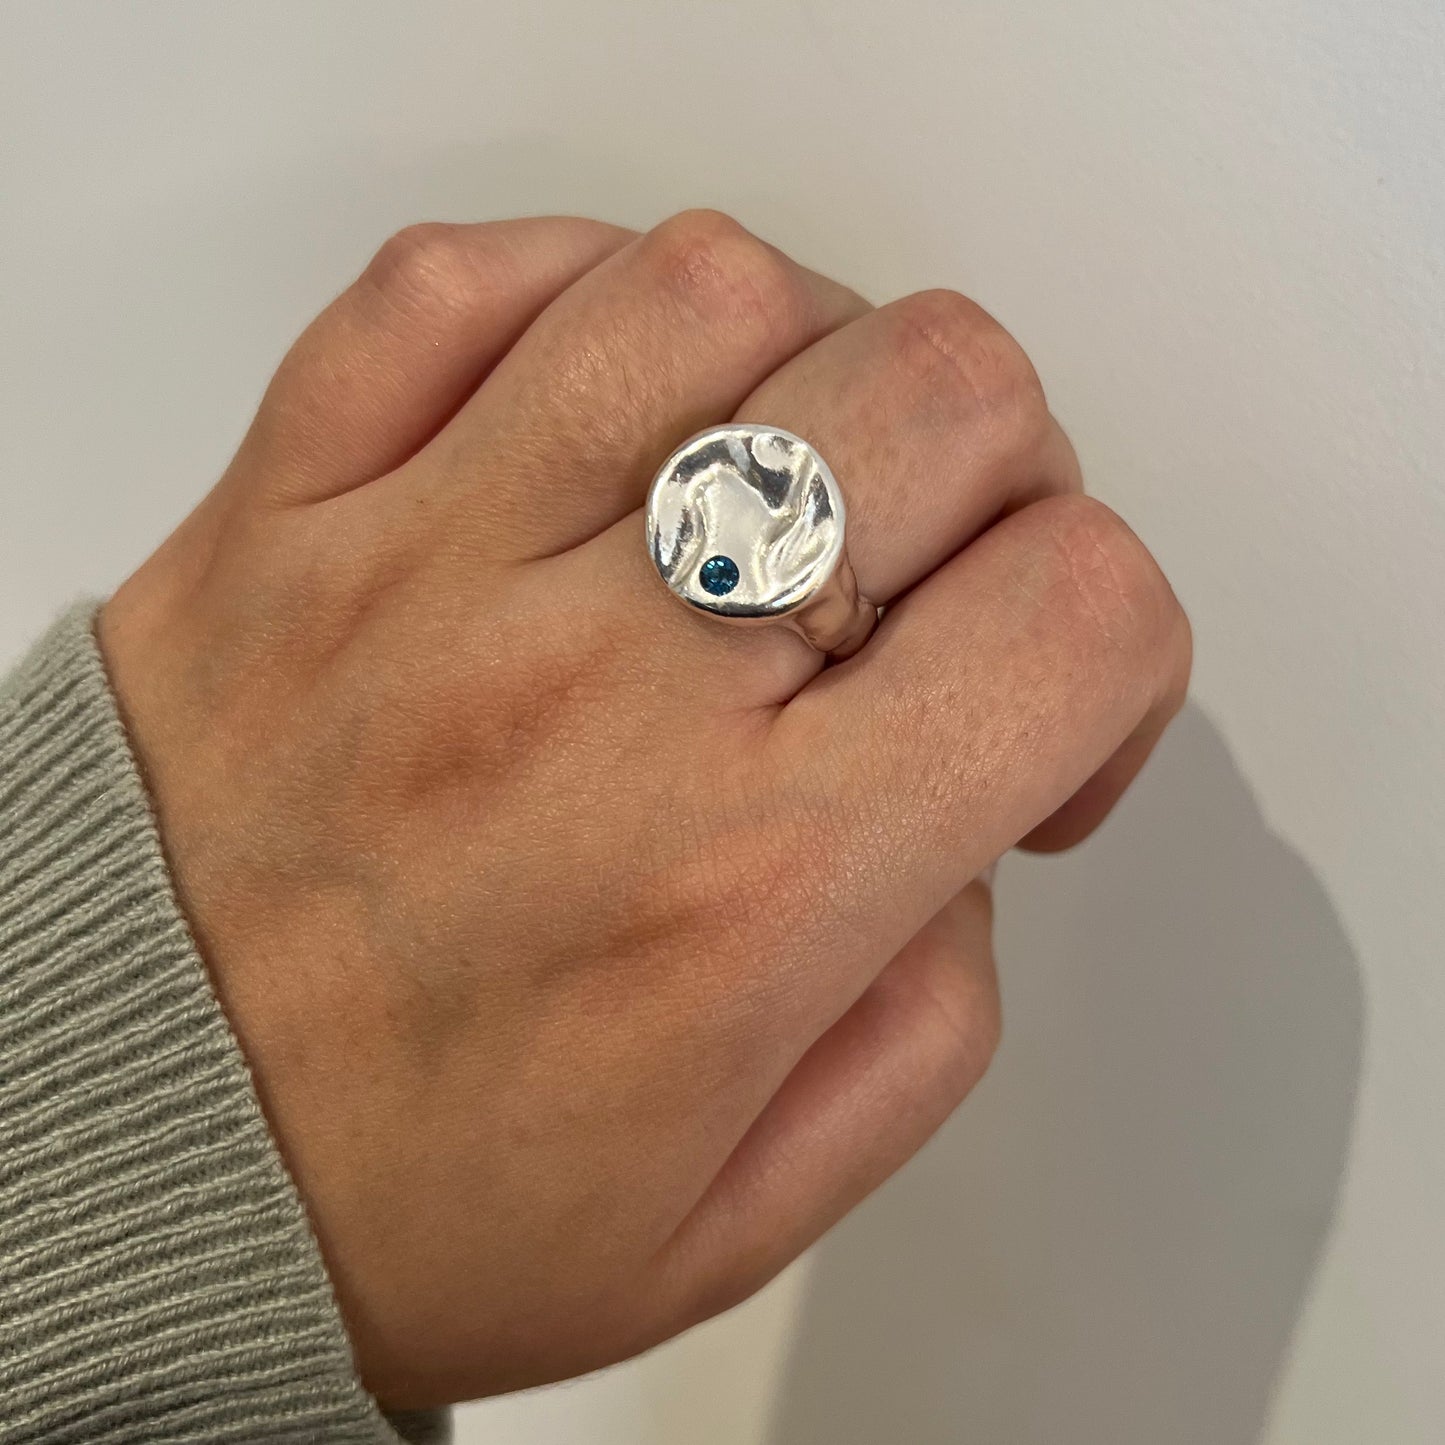 A sterling silver & blue topaz splash ring on a hand with a white background.